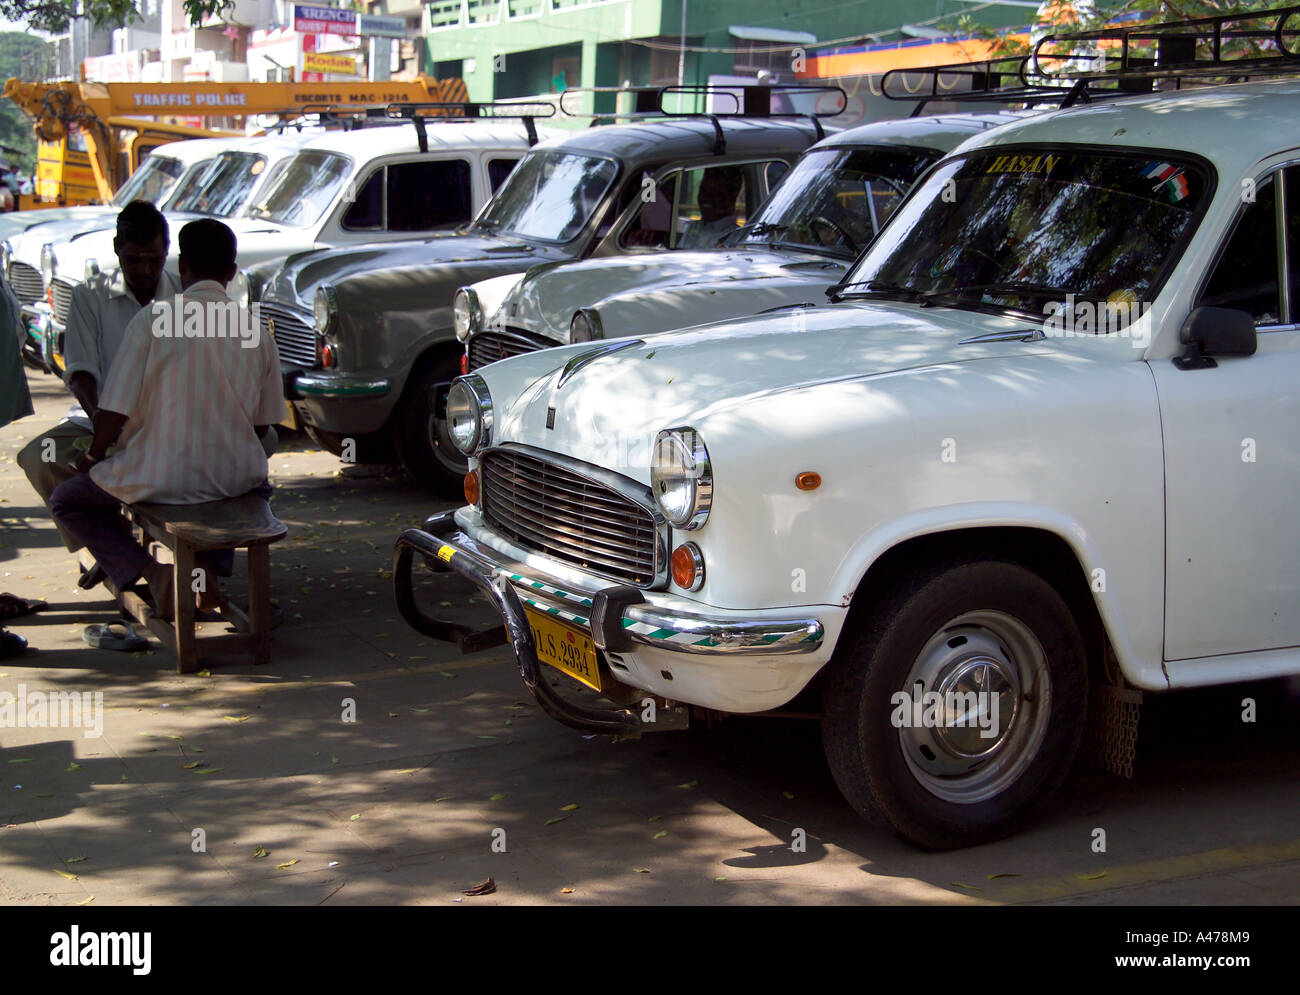 Ambassador taxis lined up for hire, Pondicherry, South India Stock Photo